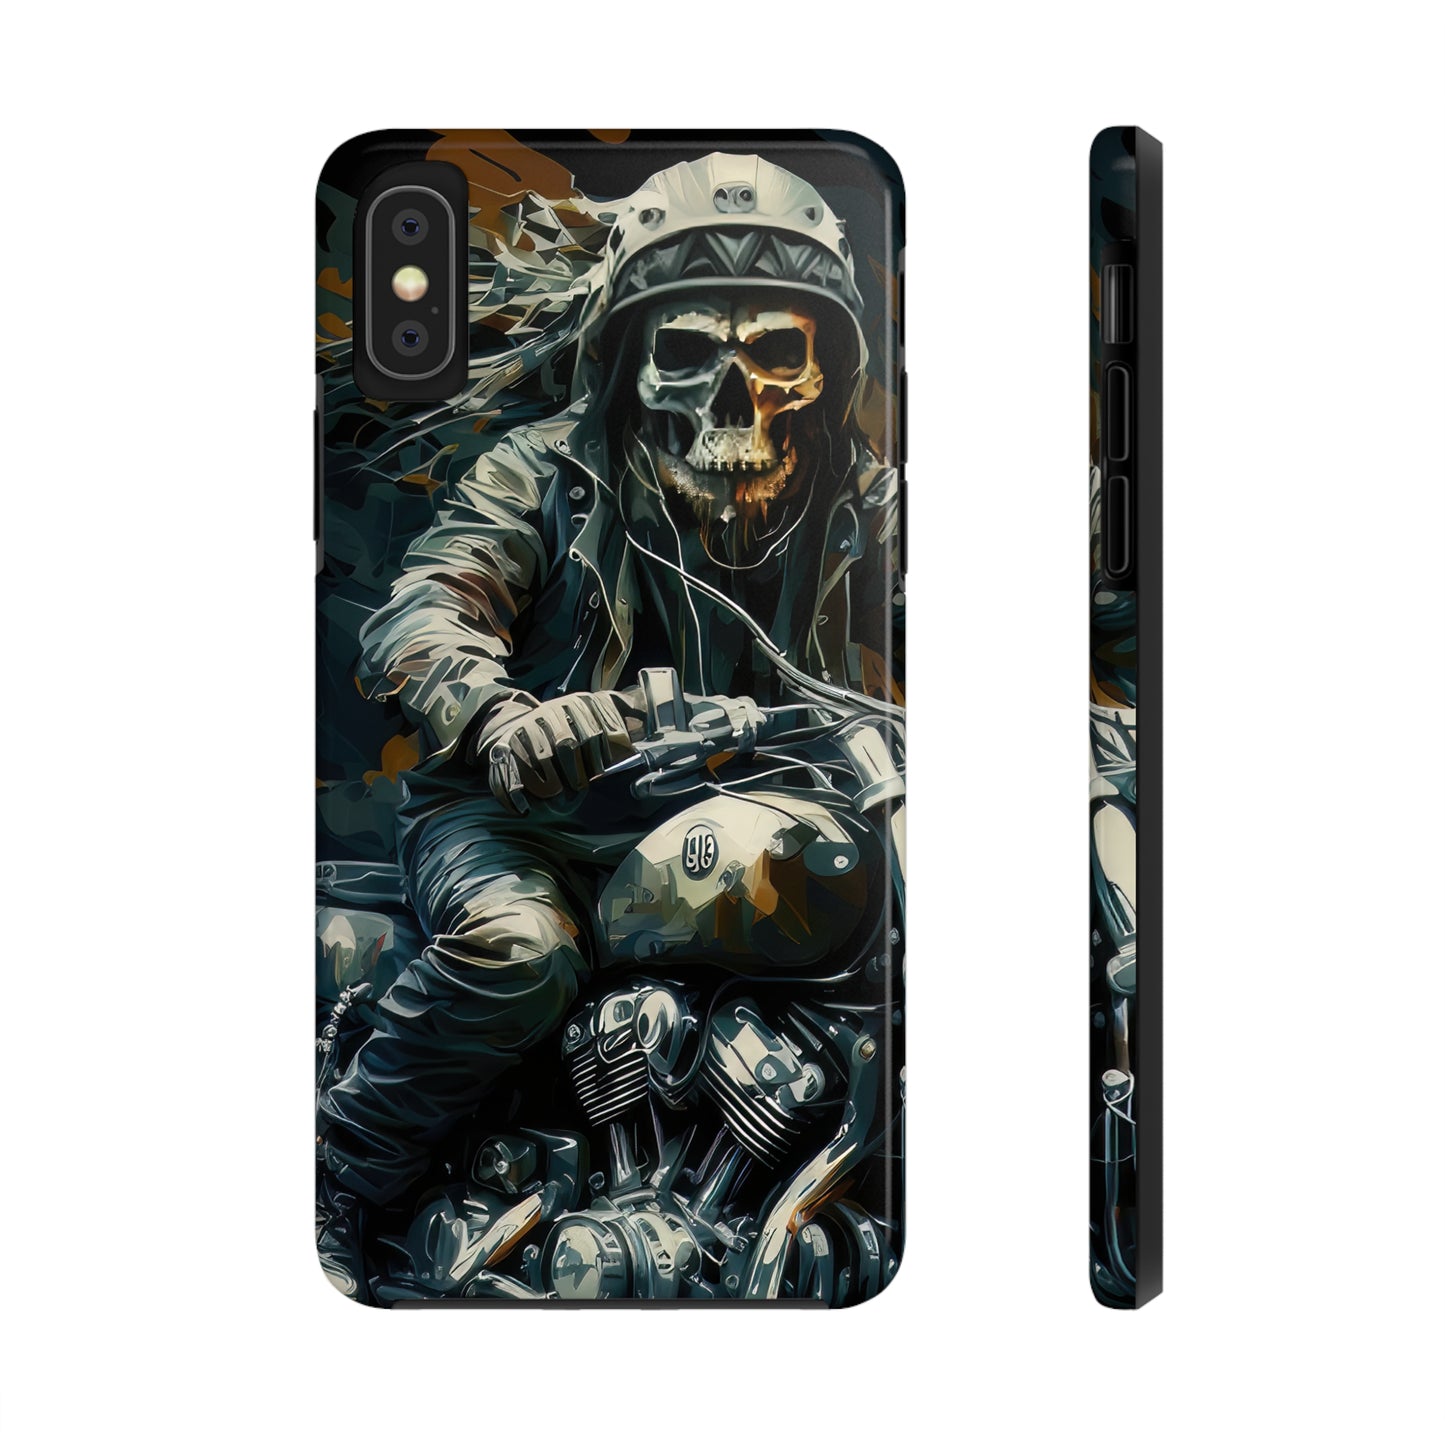 Skull Motorcycle Rider, Ready to Tear Up Road On Beautiful Bike Tough Phone Cases